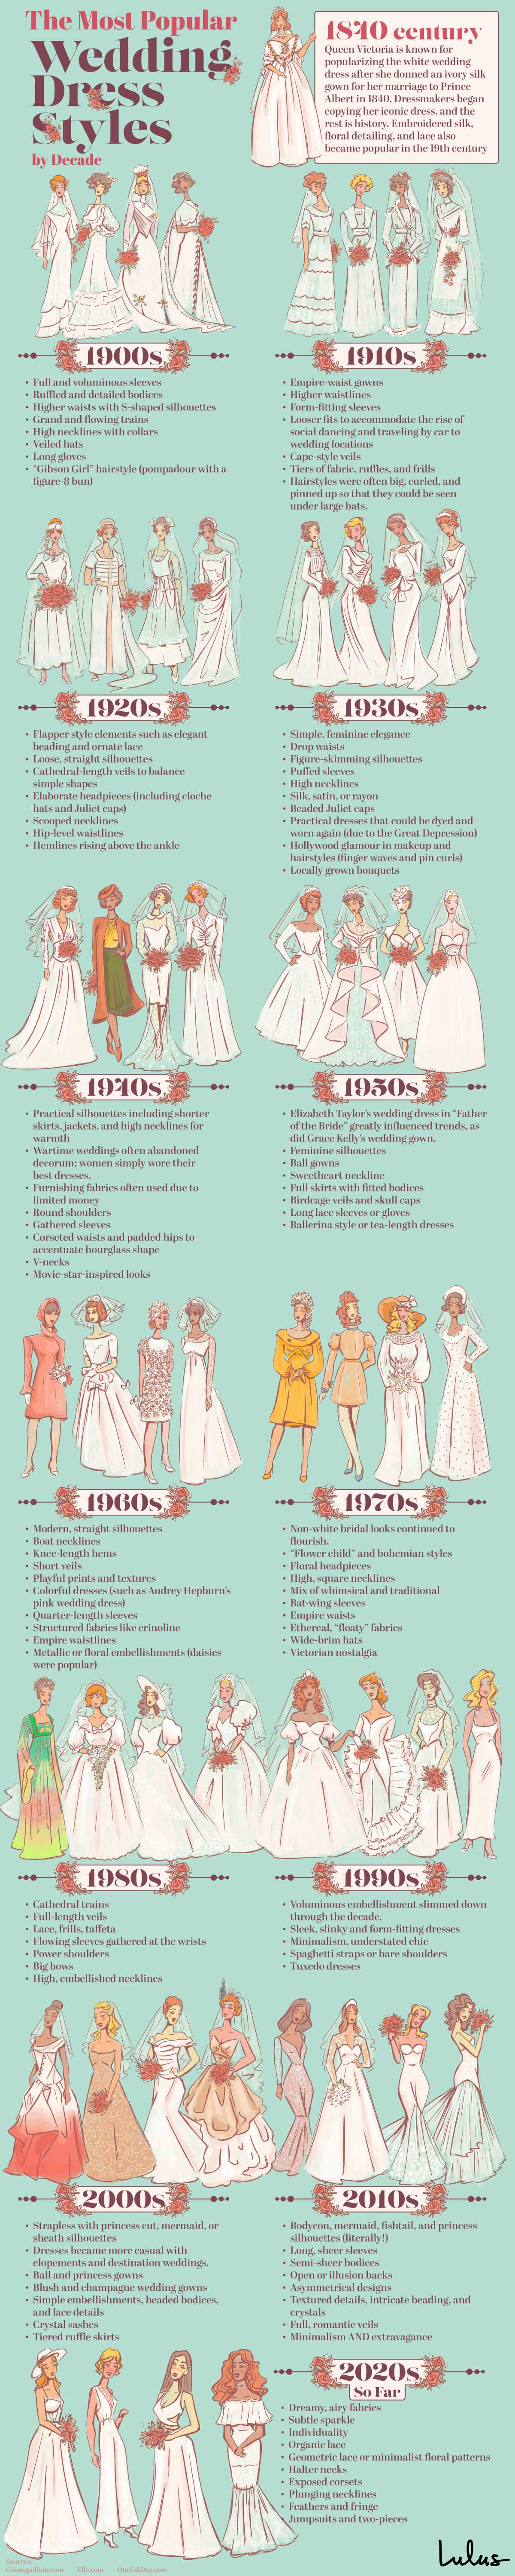 The Most Popular Wedding Dress Styles by Decade